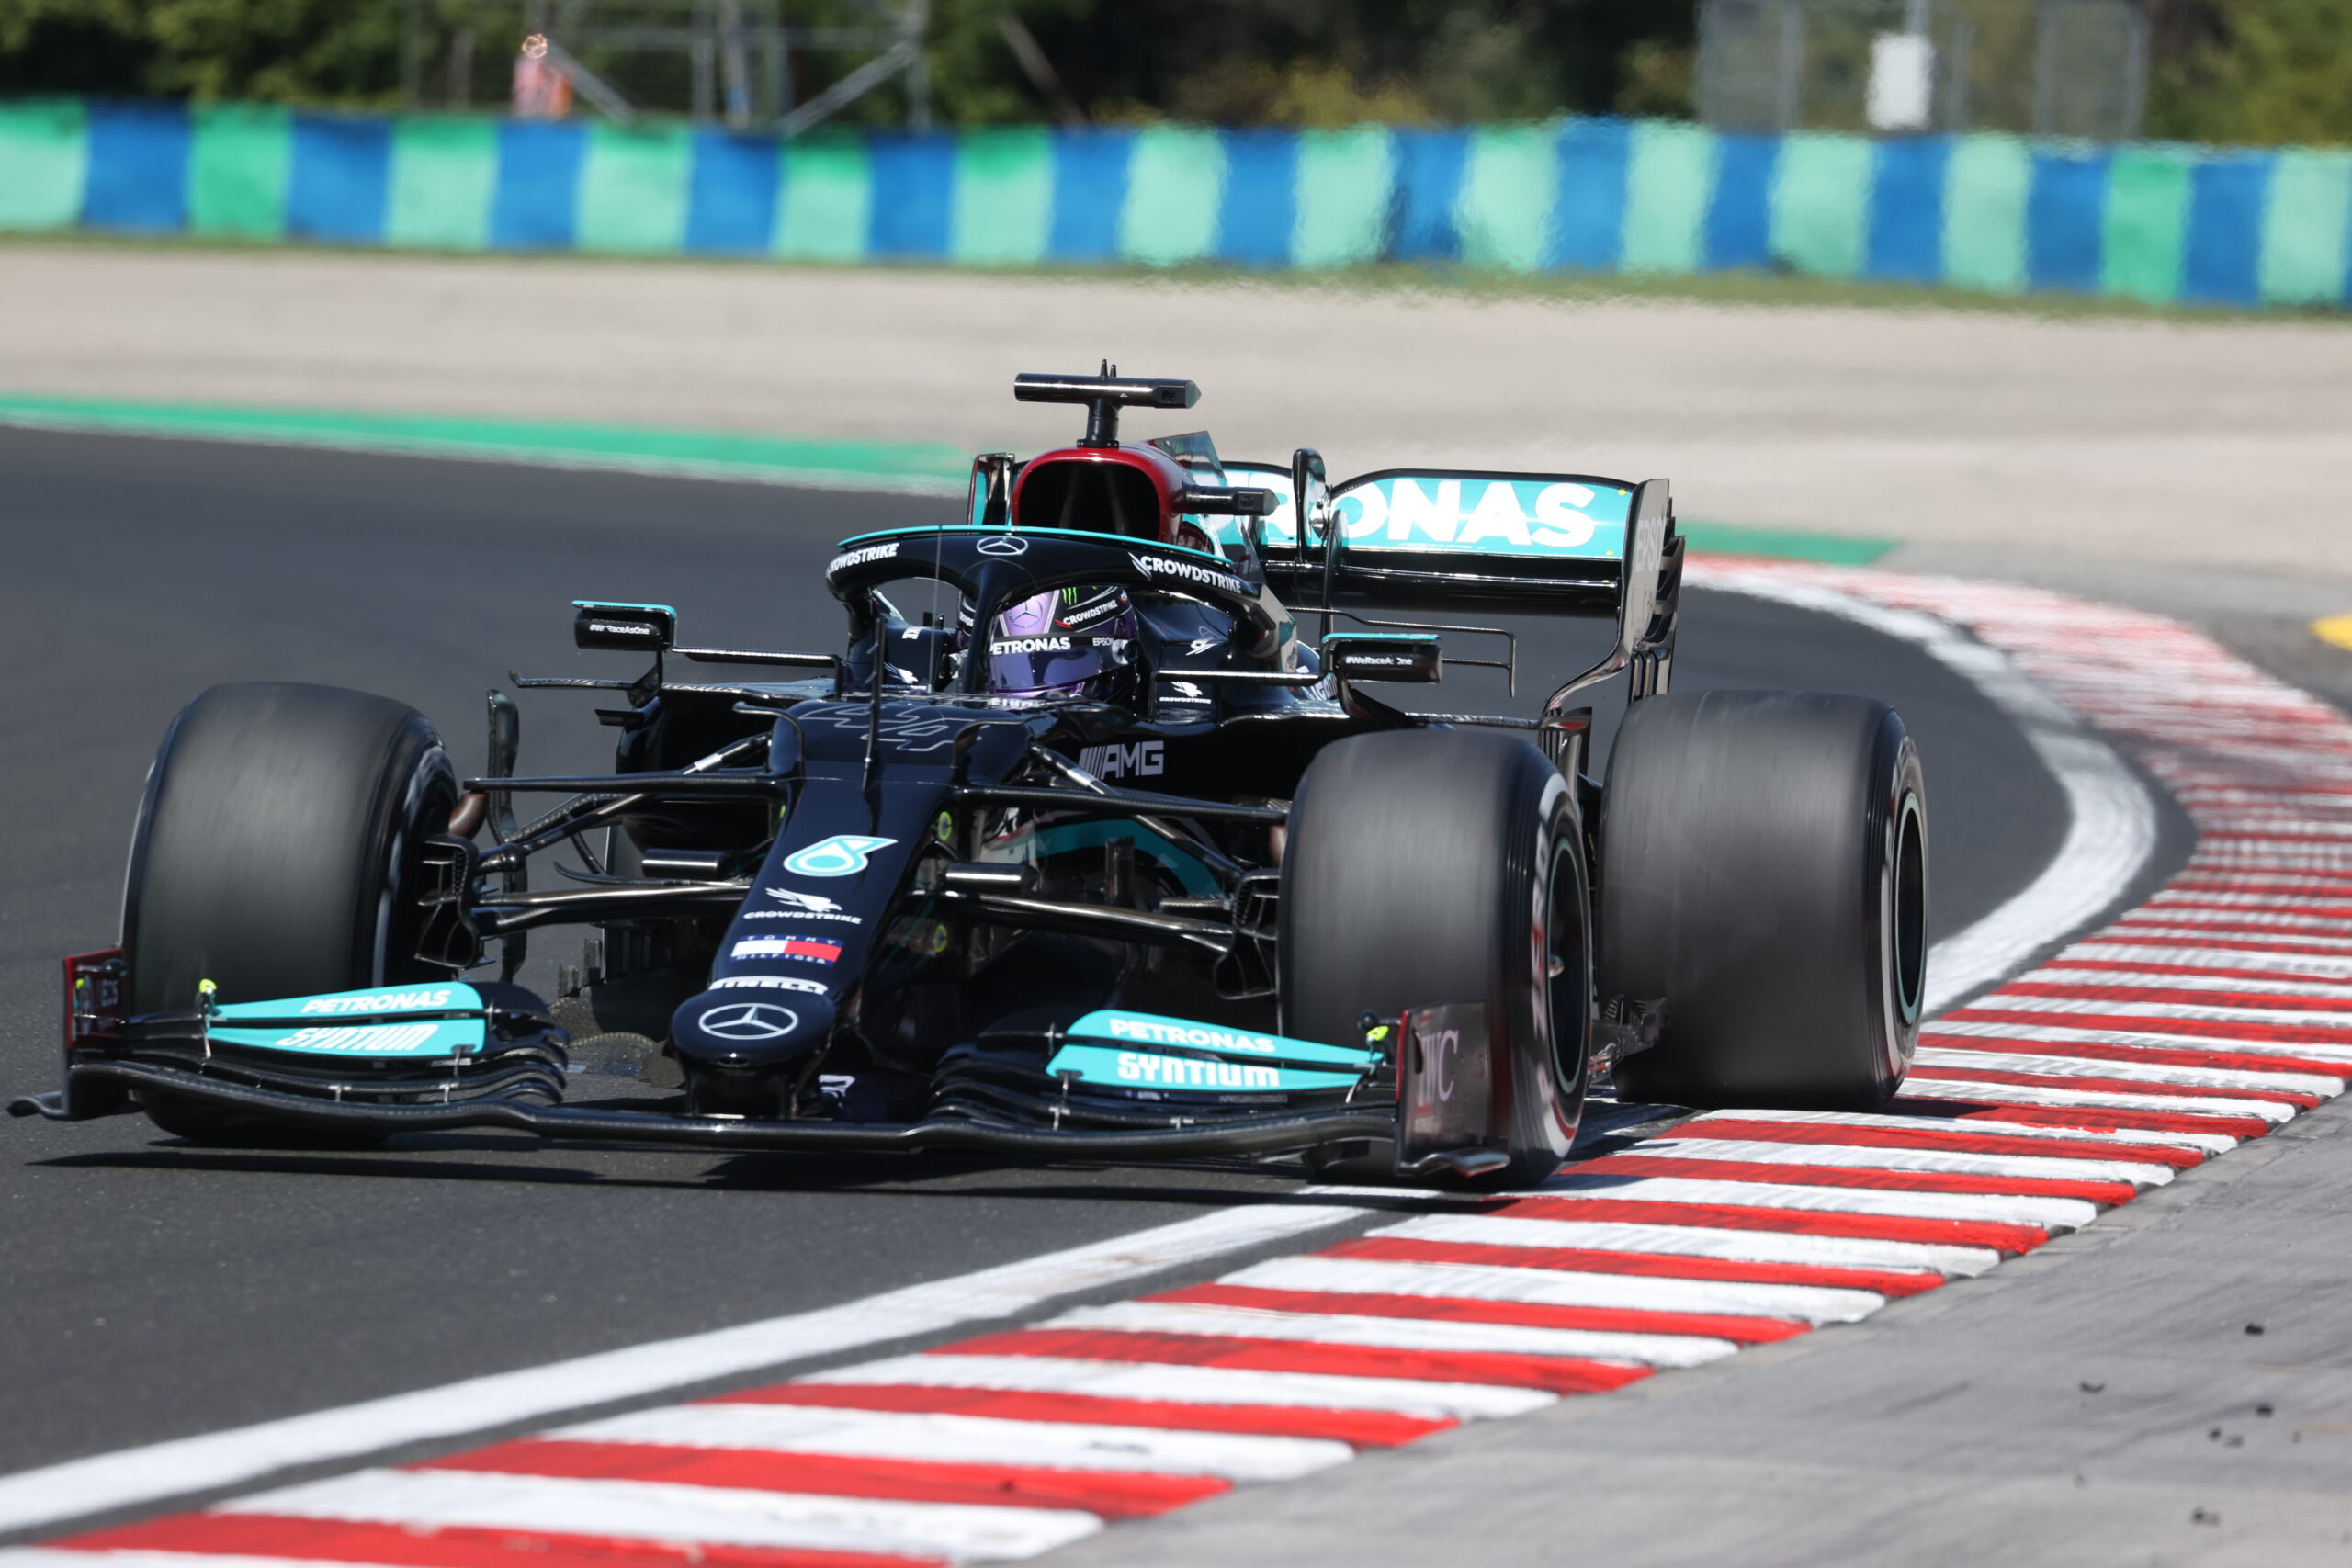 Truly, Lewis Hamilton adds to his tremendous track record at the Hungaroring with his eighth pole position. (Photo: Wolfgang Wilhelm | Mercedes-AMG Petronas Formula One Team)